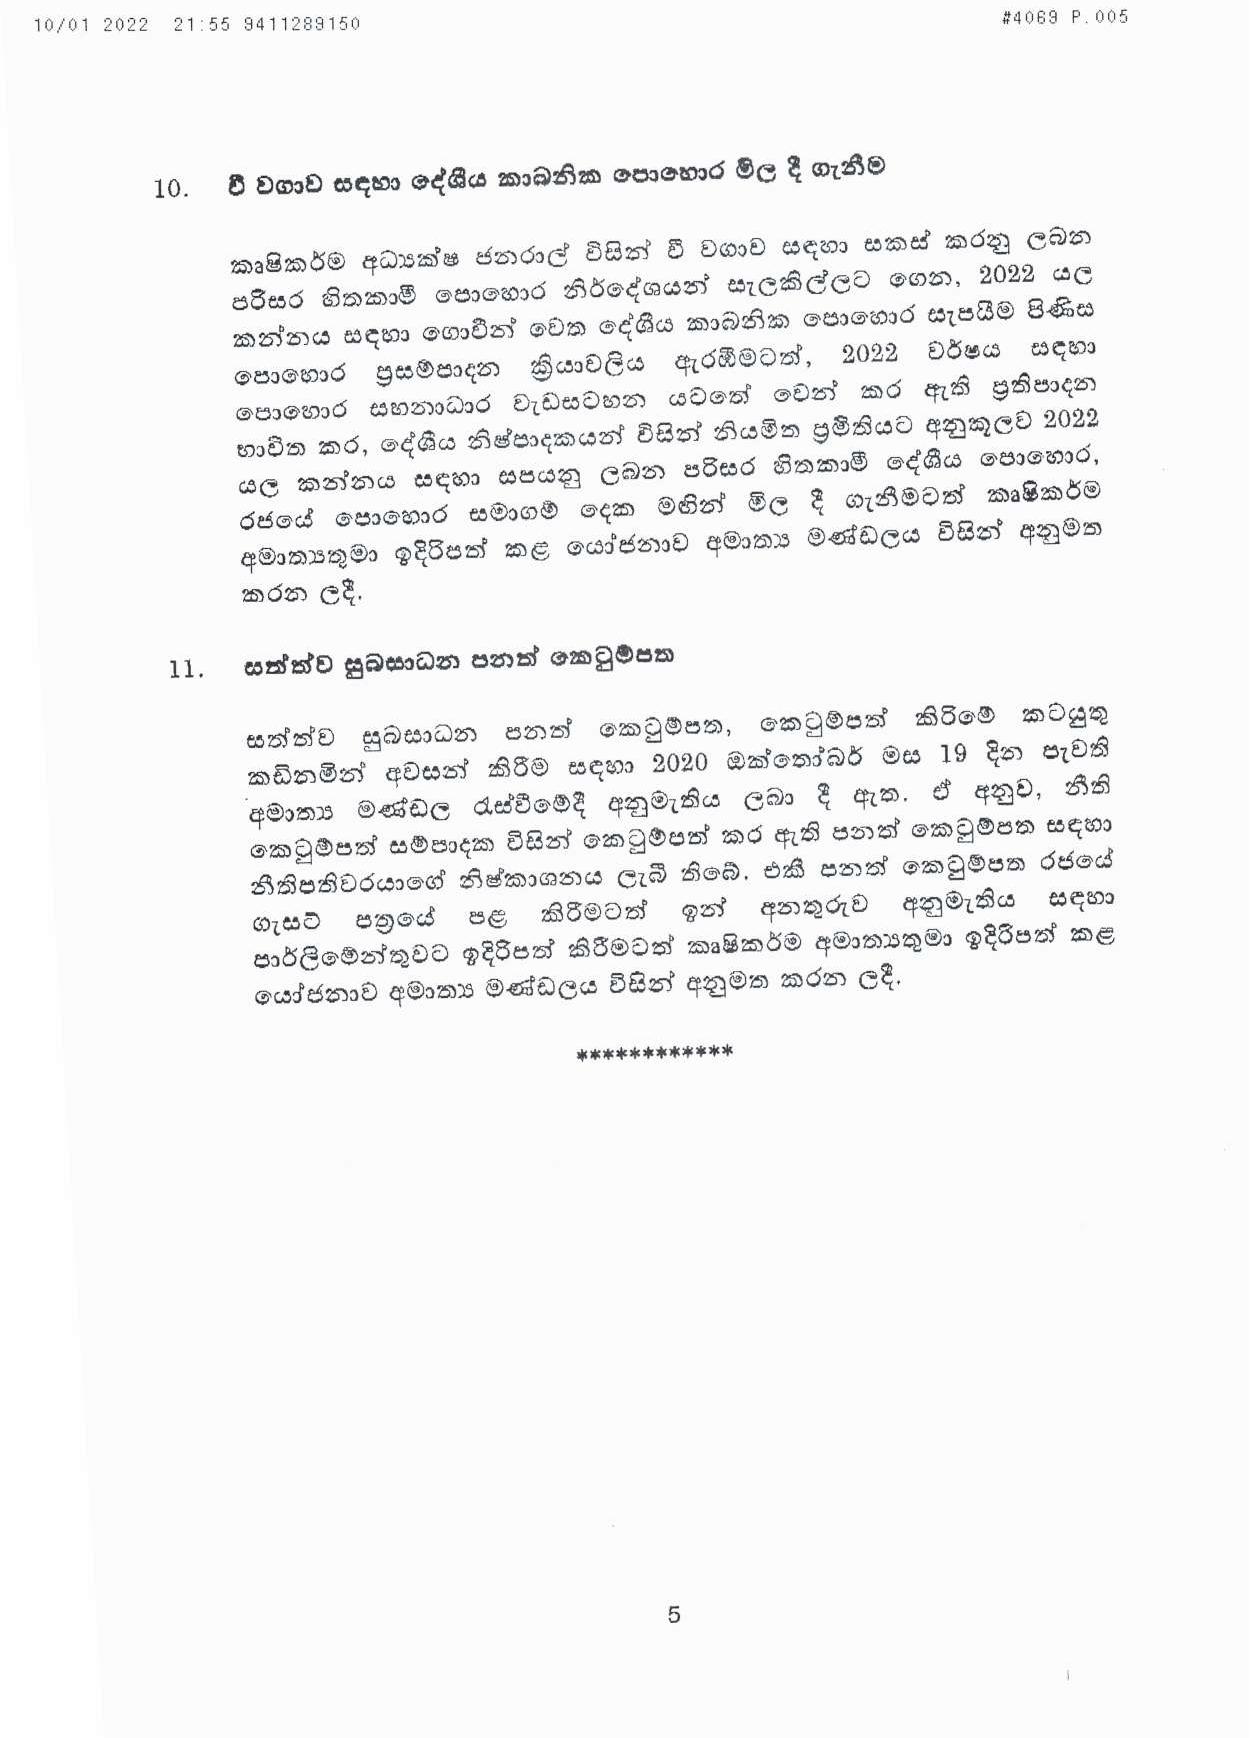 Cabinet Decision on 10.01.2022 page 005